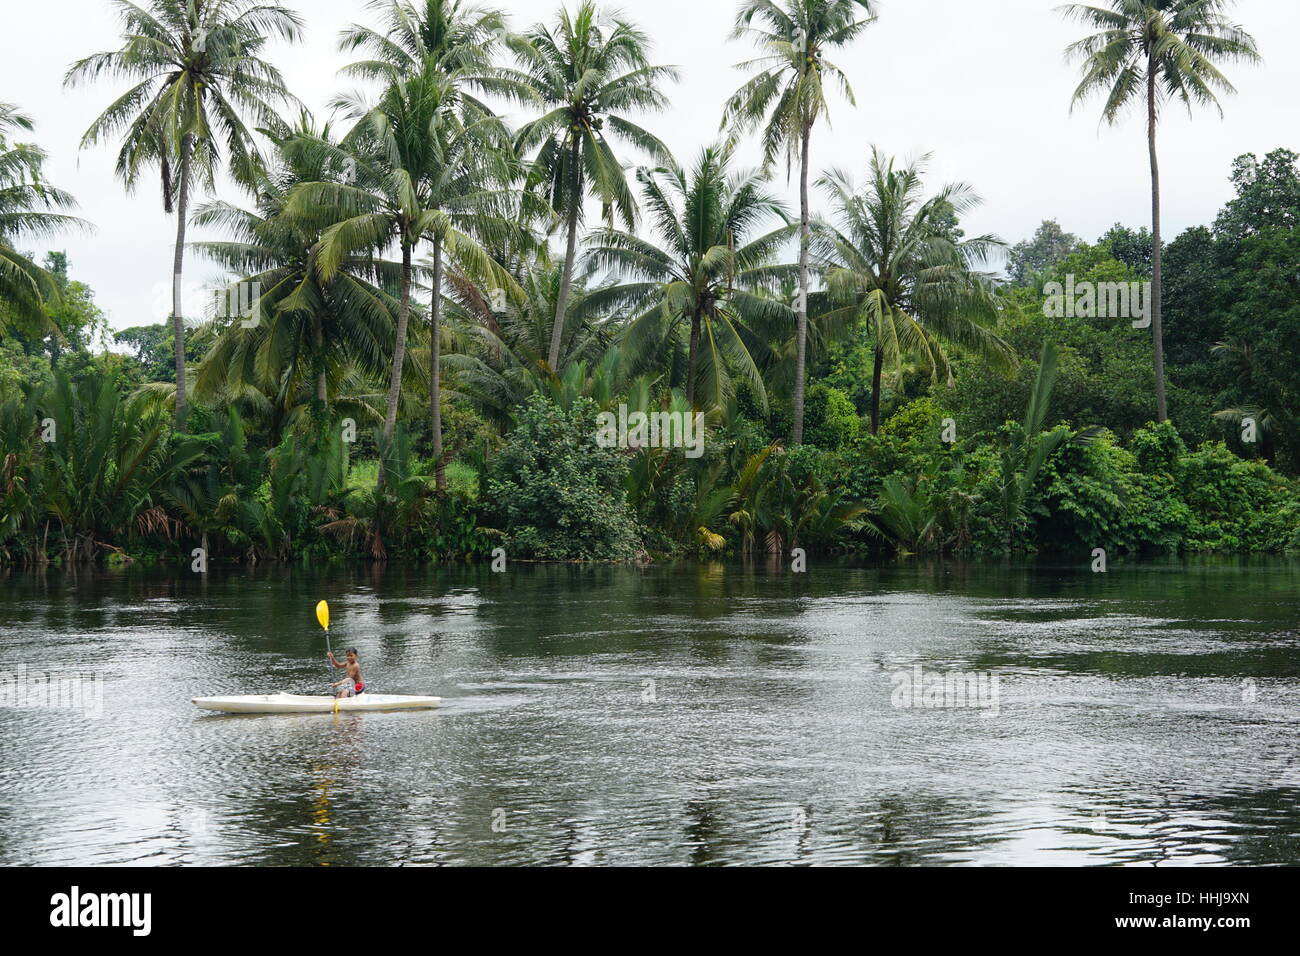 Kayak / Canoe on the River in Kampot with Palm Trees / Coconut Trees in Kampot Cambodia Stock Photo